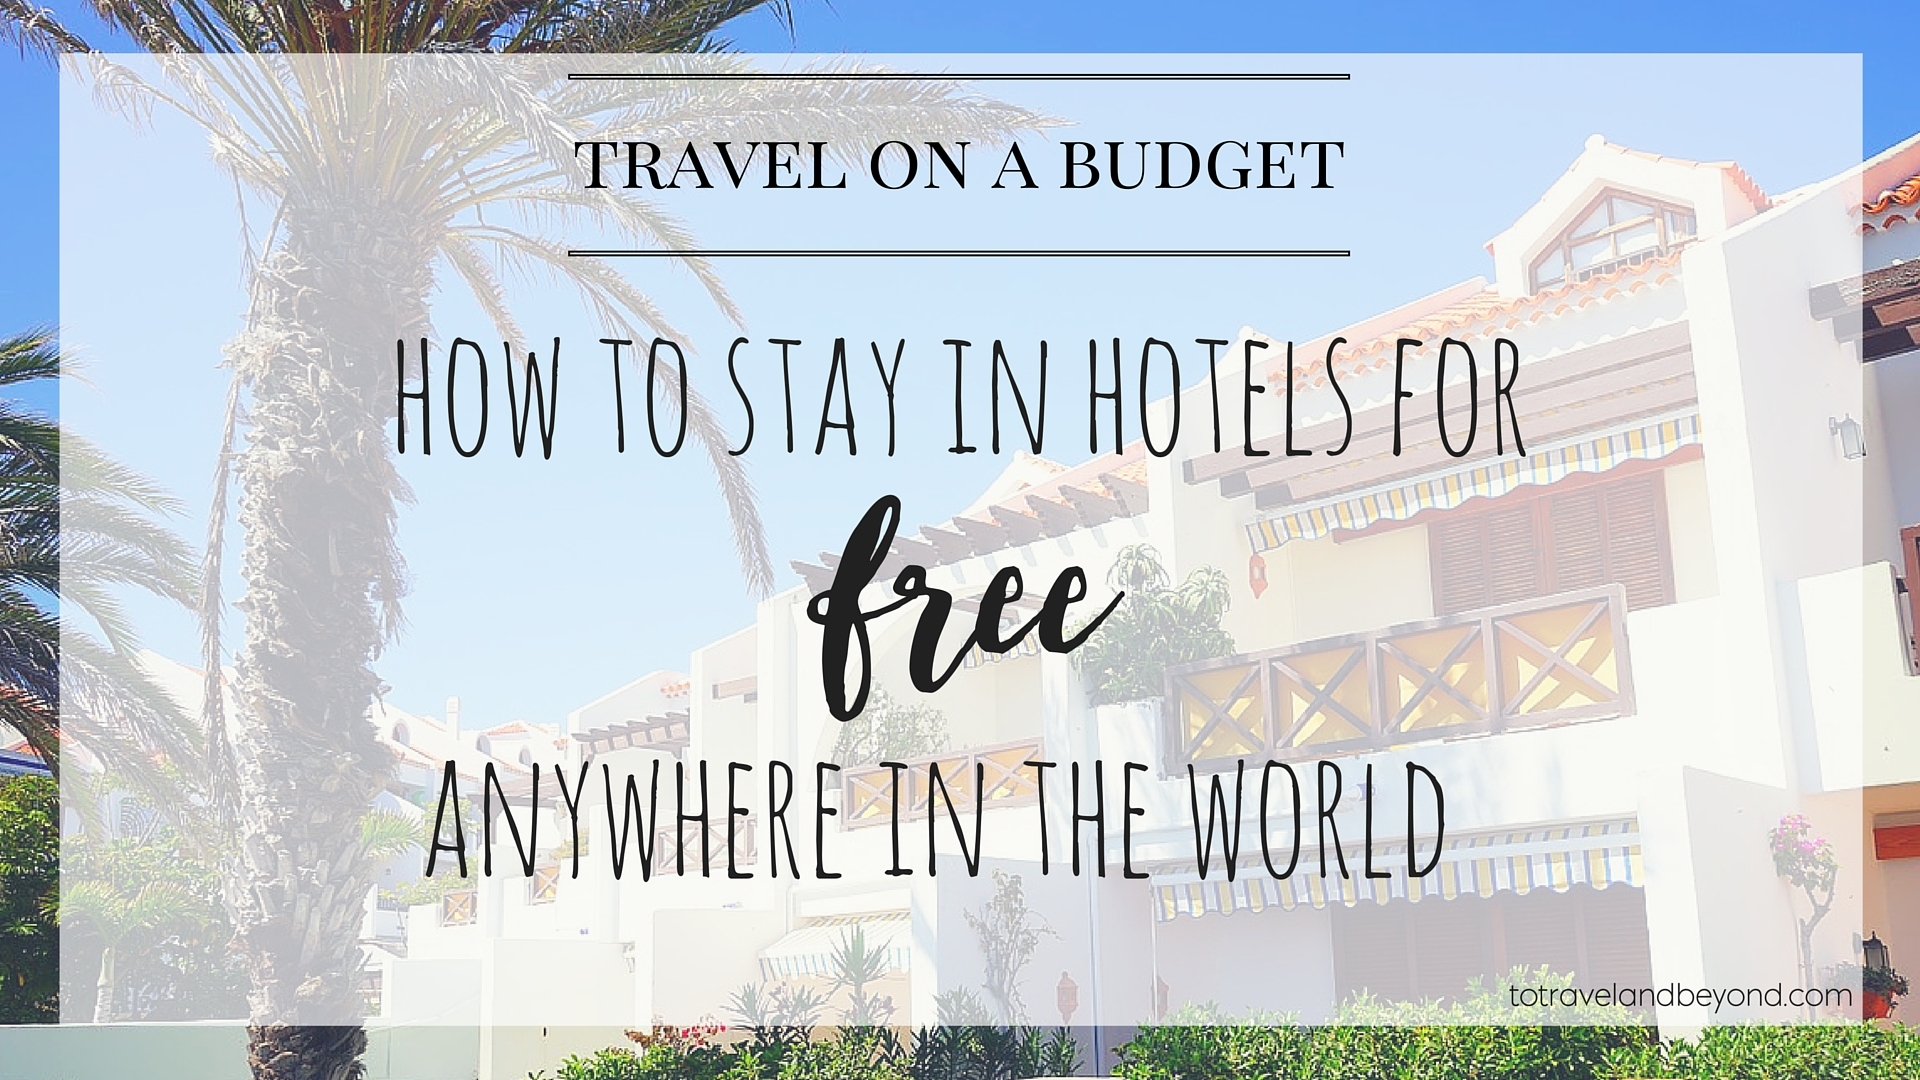 Travel On A Budget: Booking a Hotel